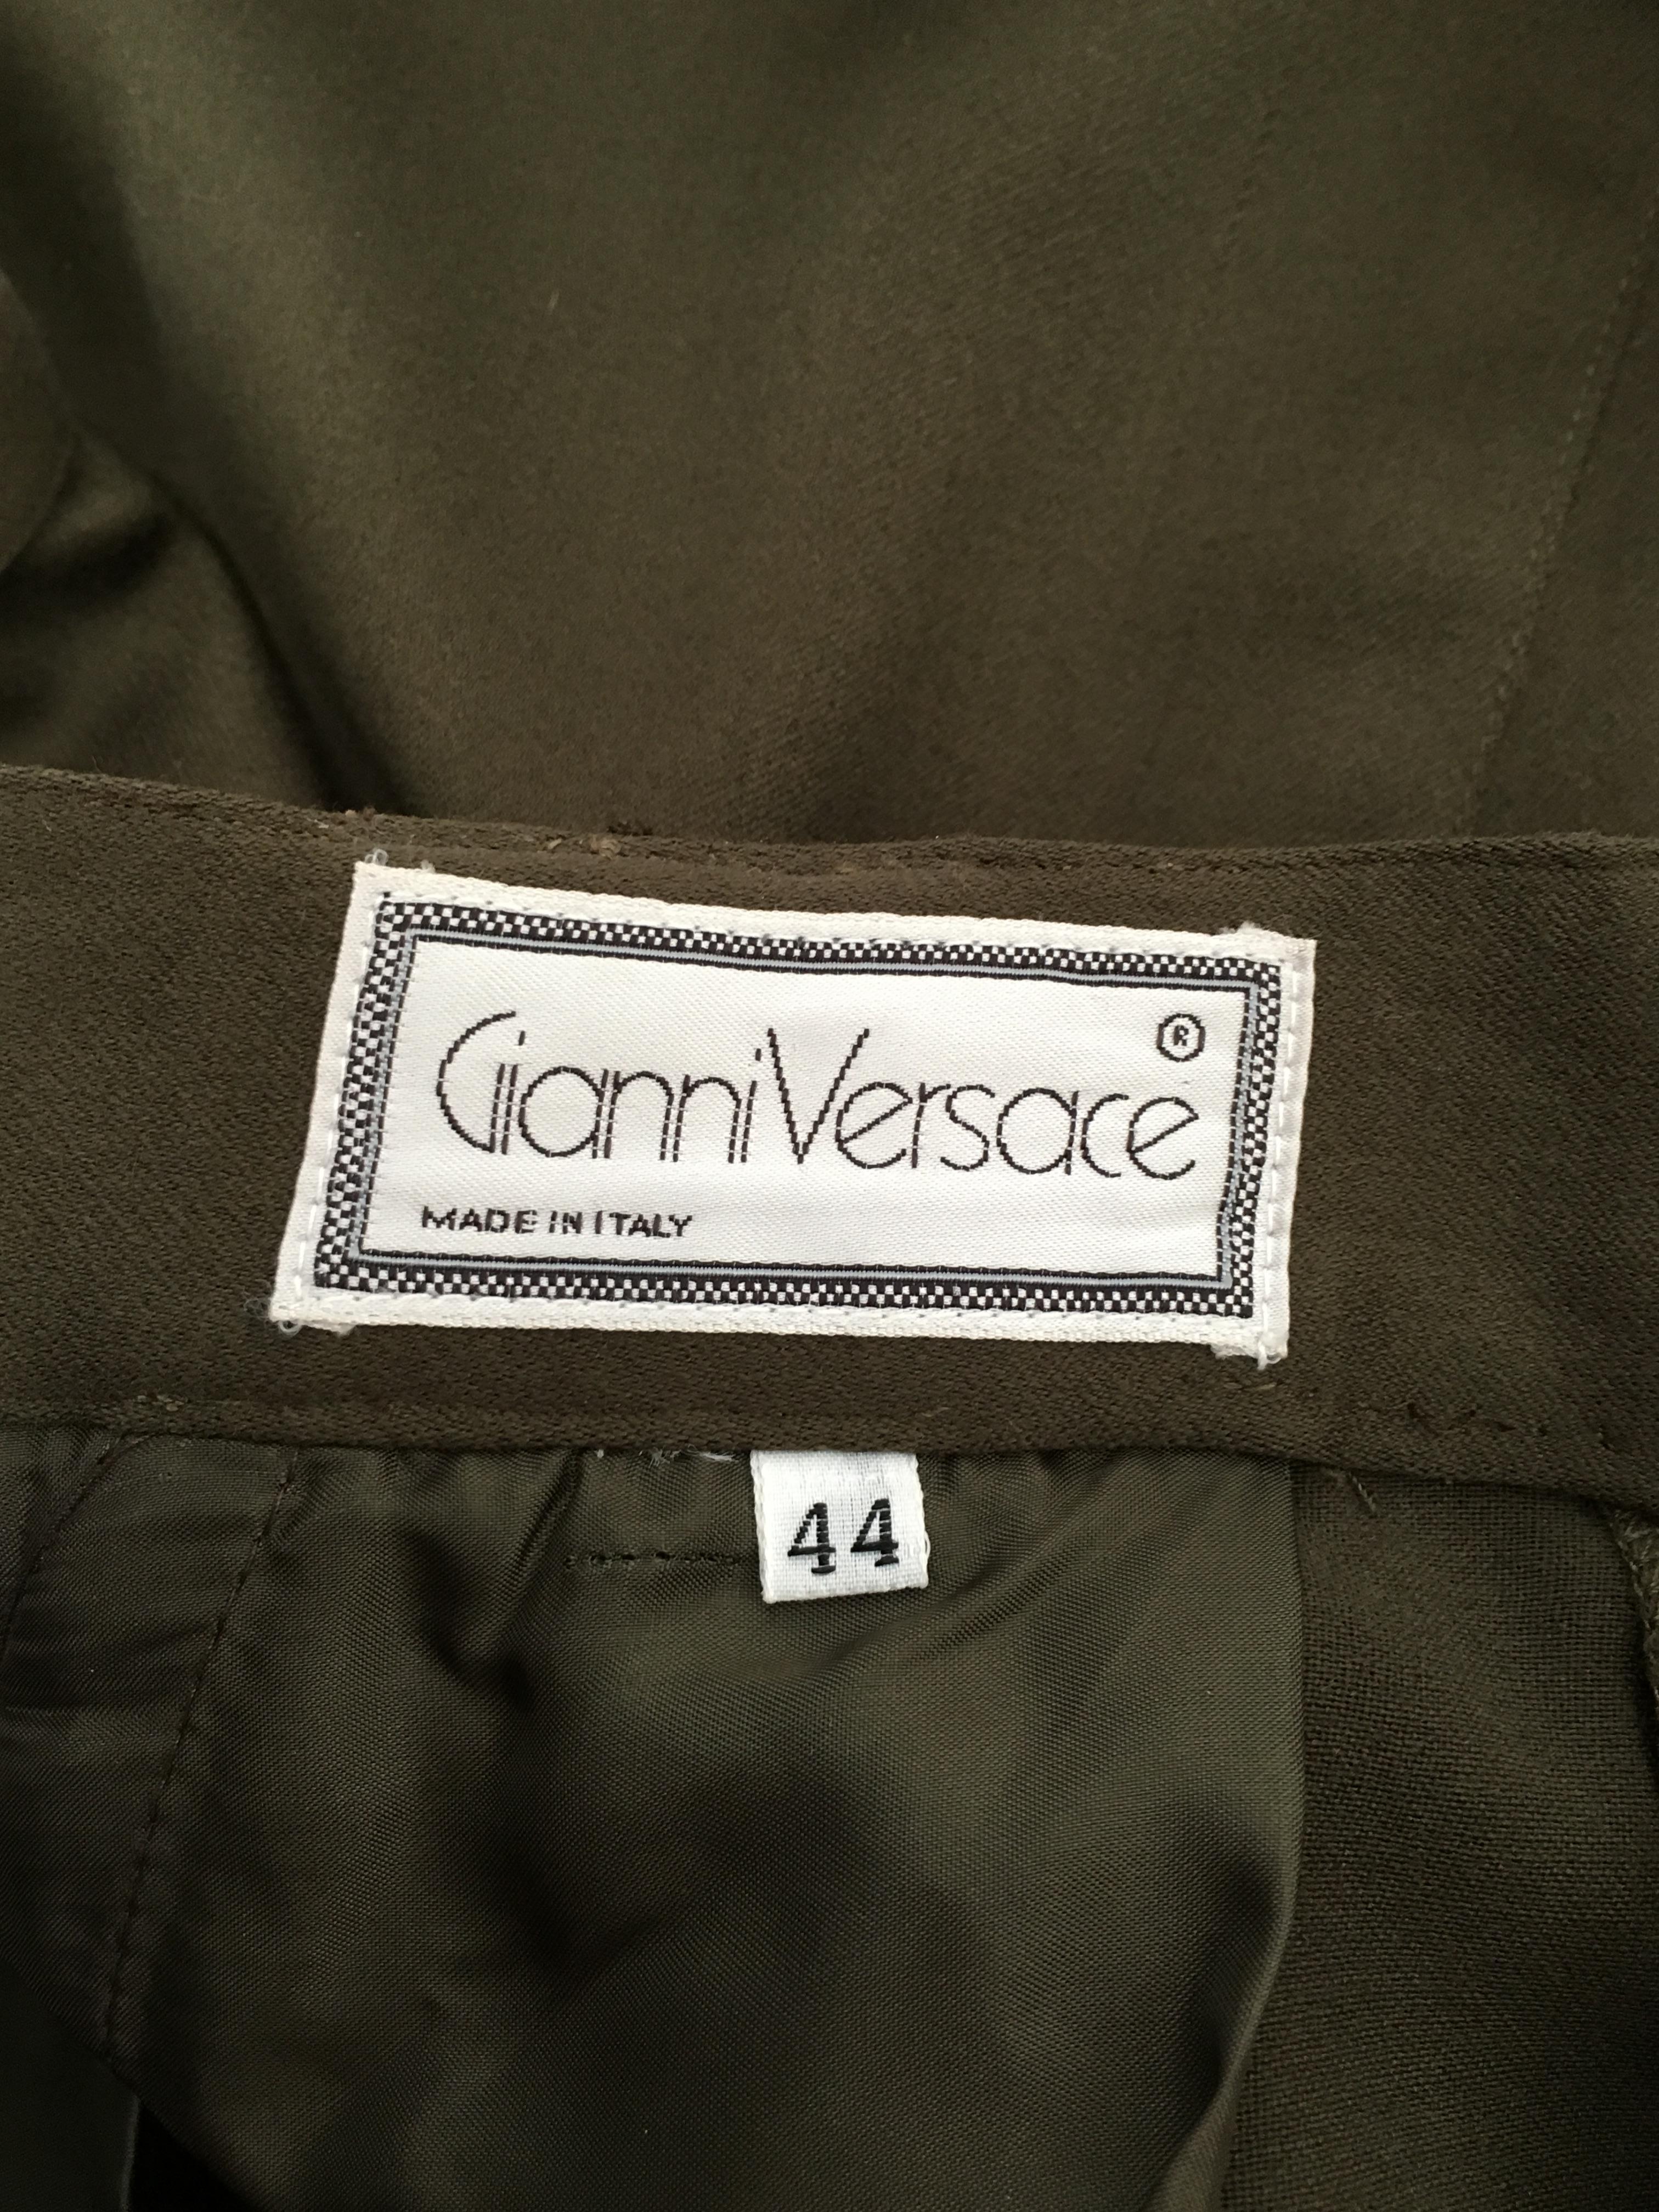 Gianni Versace 1980s Olive Wool Skirt with Pockets Size 6. For Sale 11